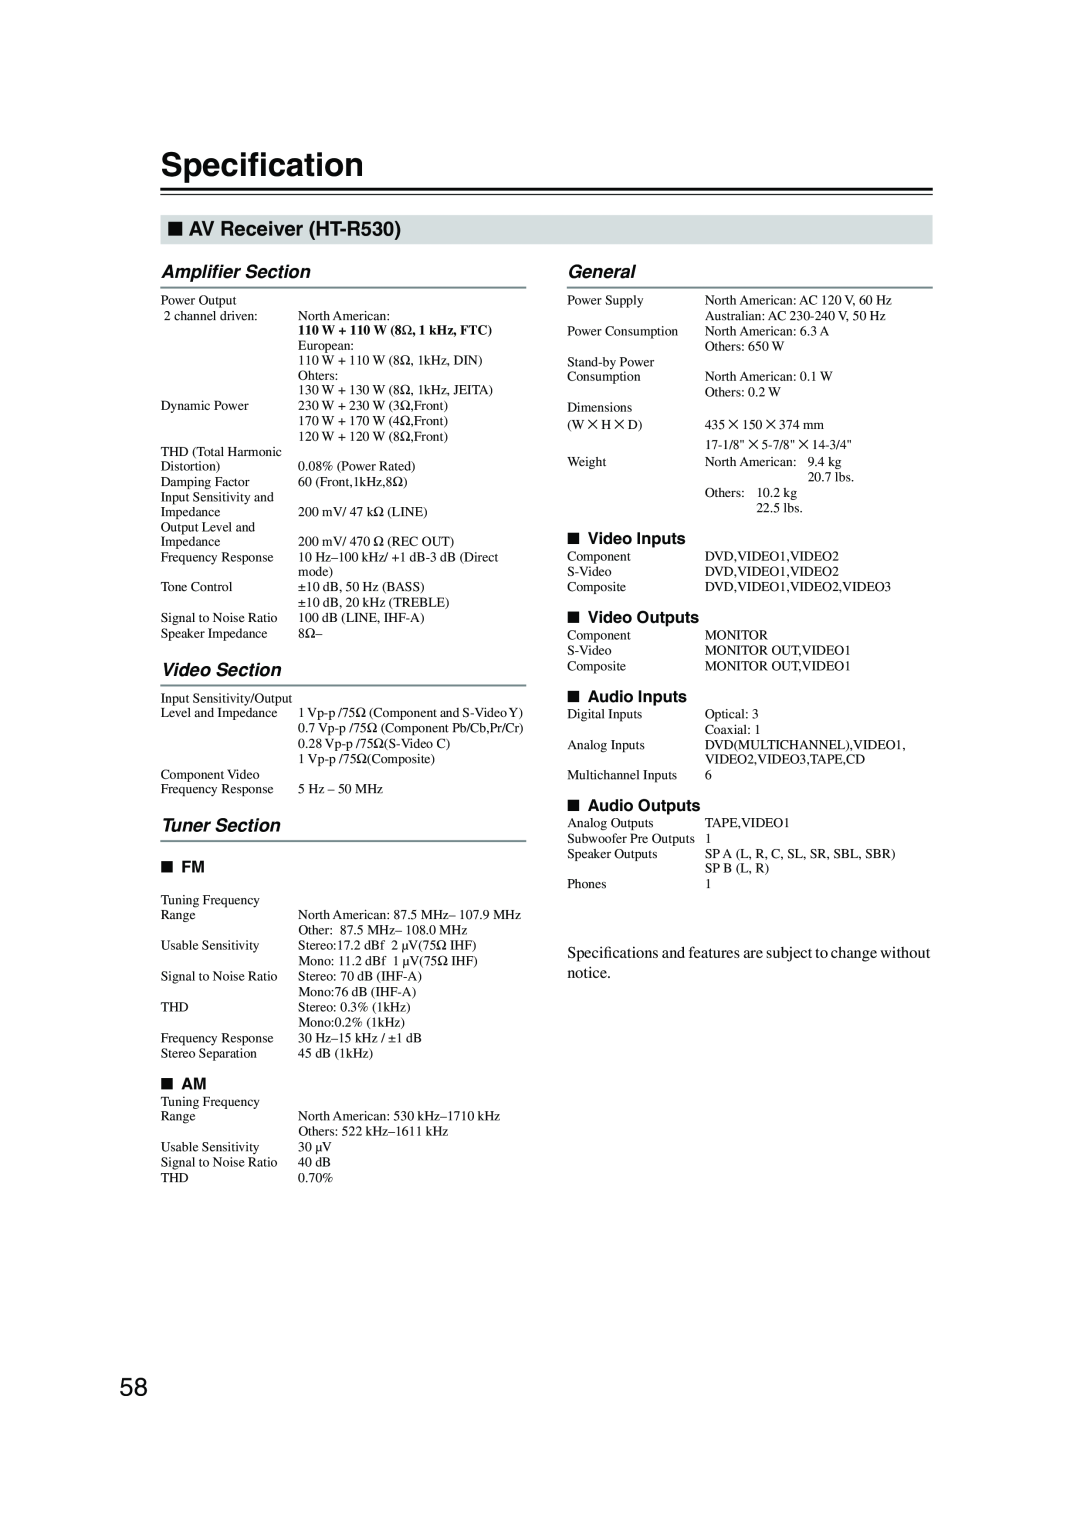 Onkyo HT-S780 instruction manual Speciﬁcation, AV Receiver HT-R530, Ampliﬁer Section, Video Section, Tuner Section, General 